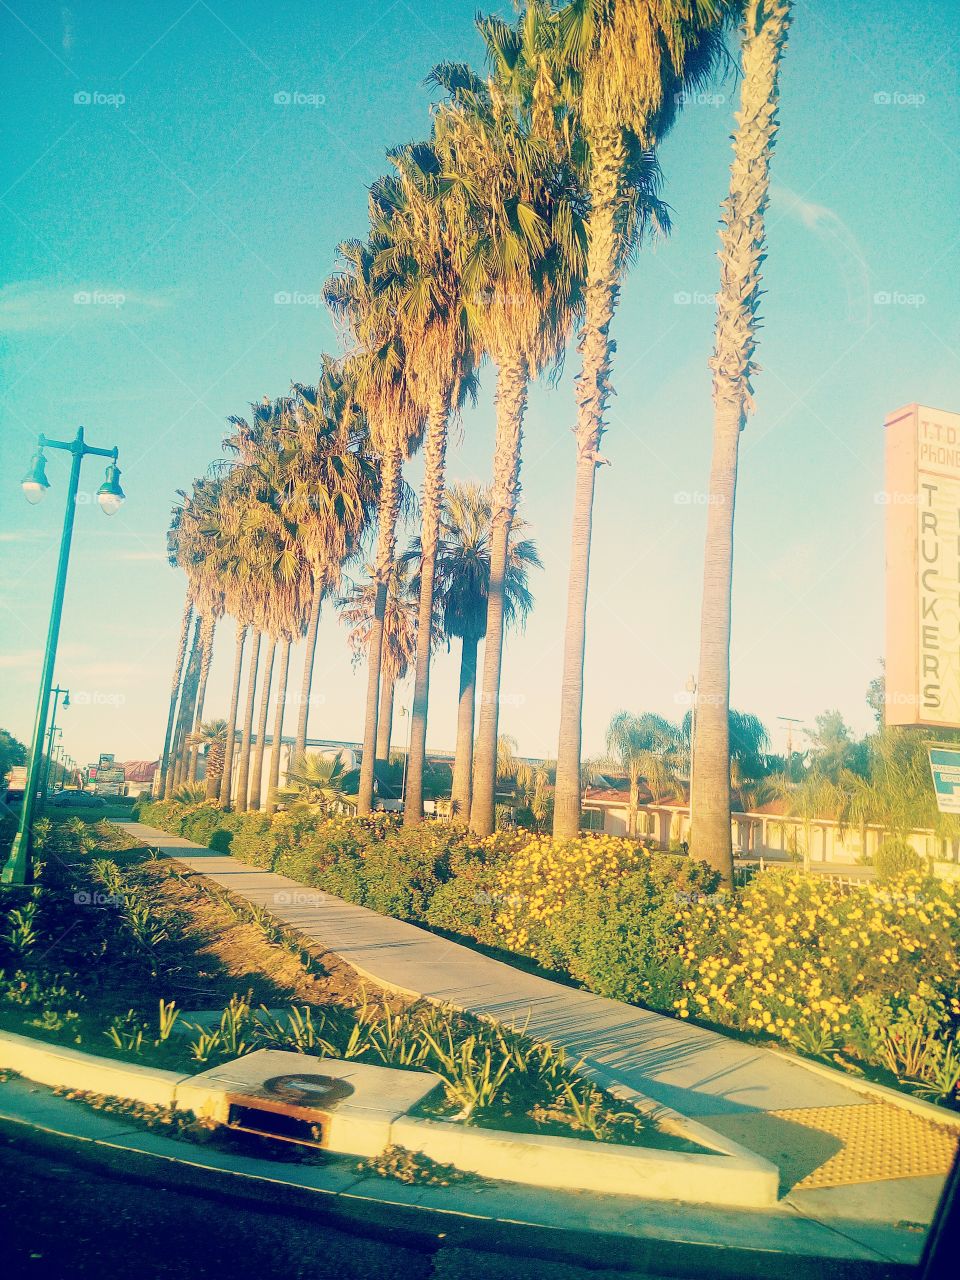 Sunny California is best known for there Beautiful and many palm trees that stand together near the streets.